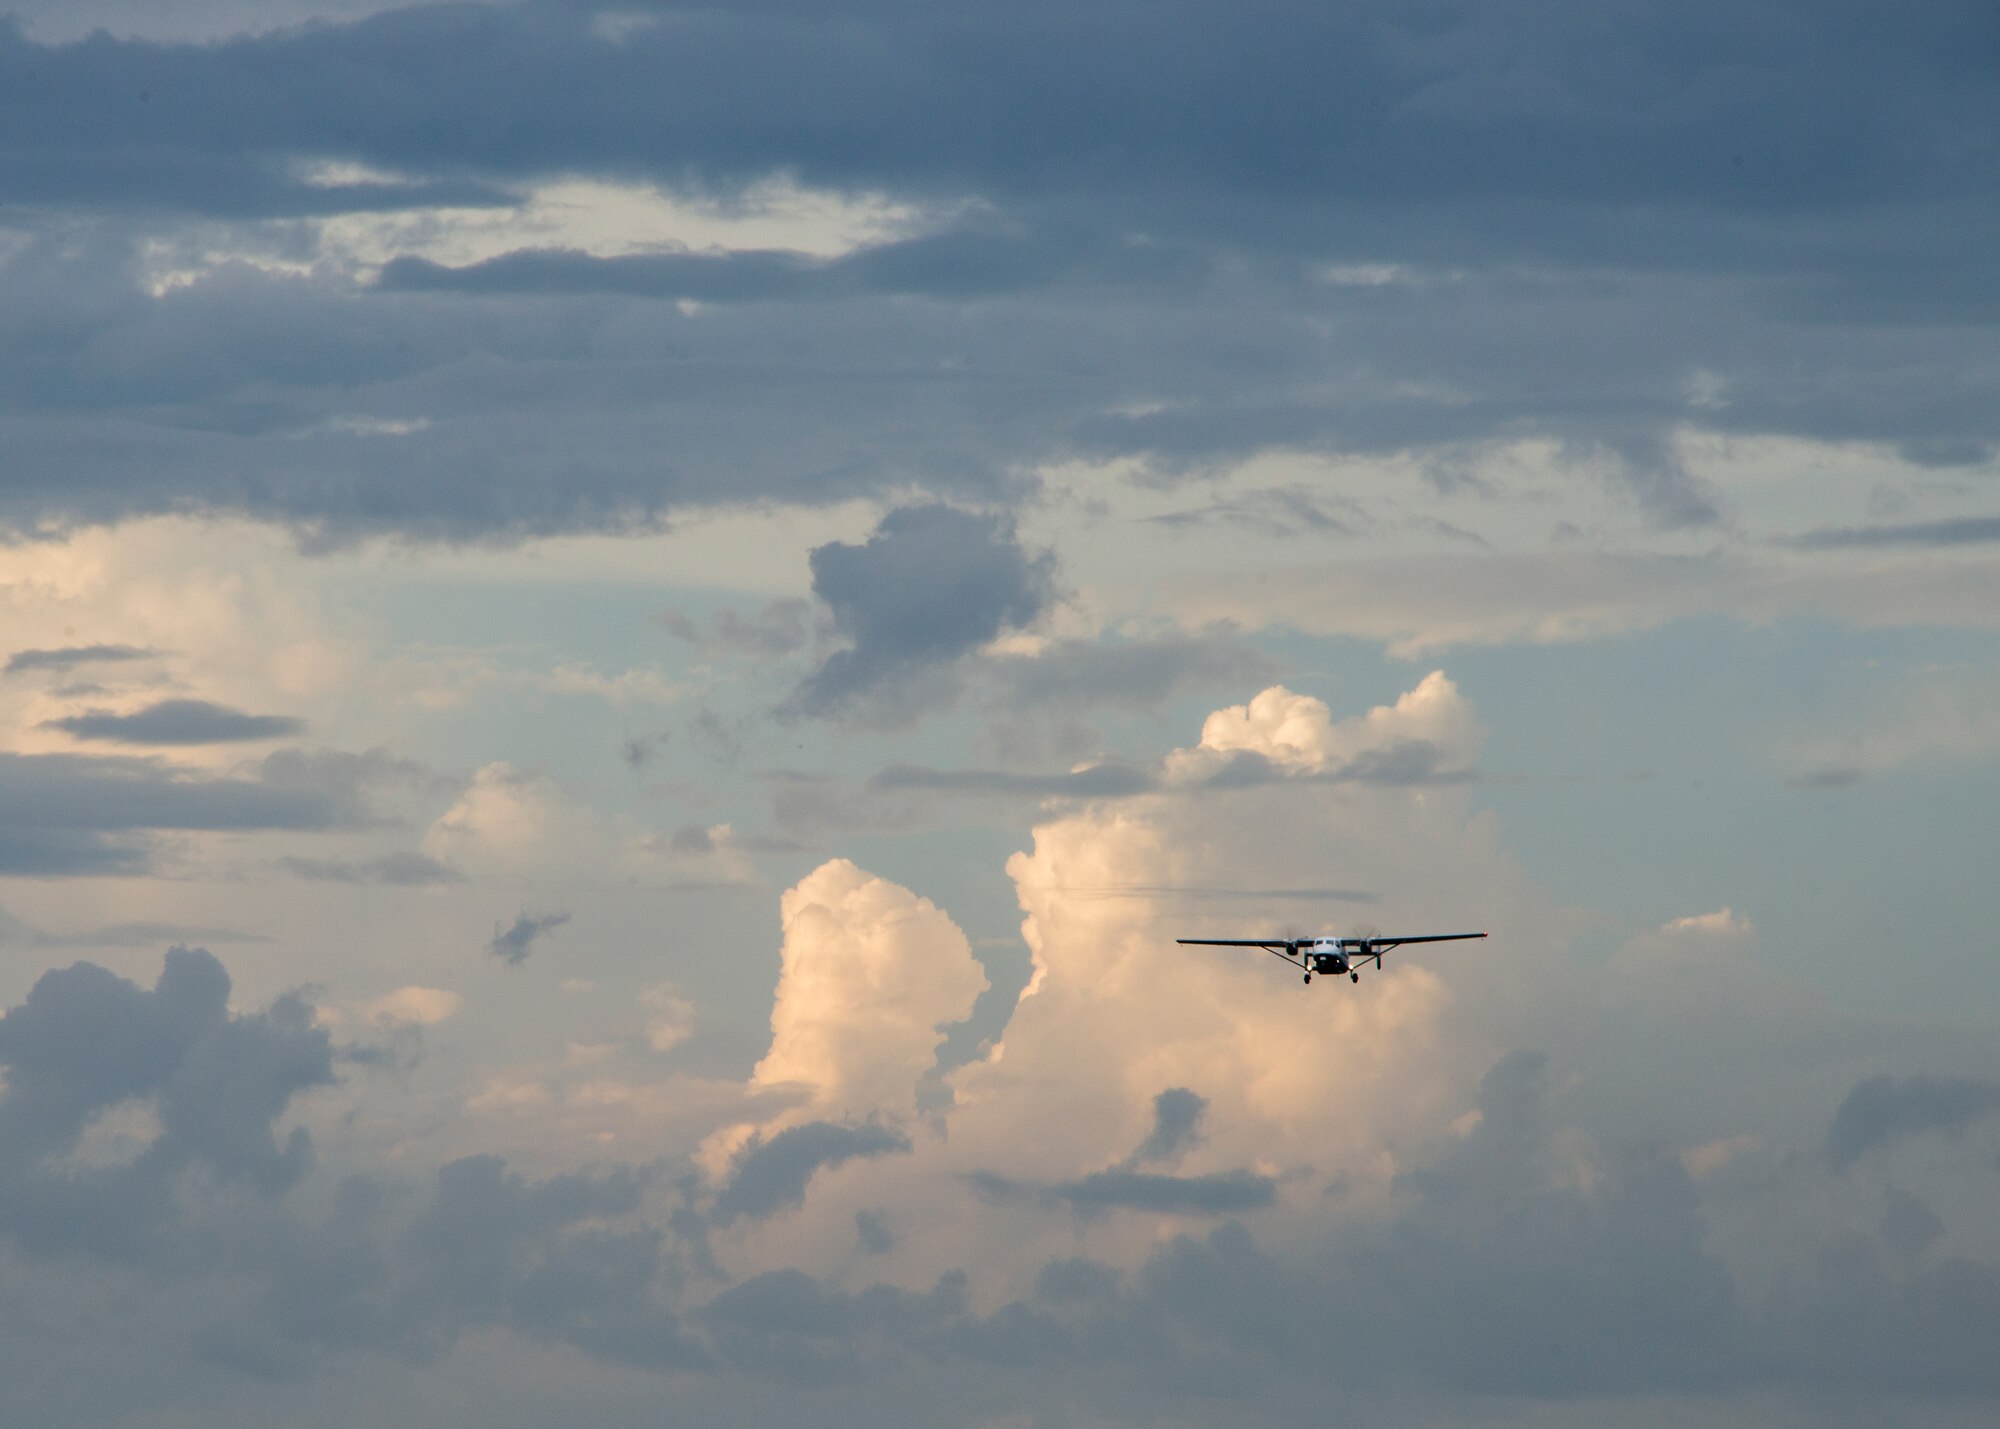 A C-145 Skytruck approaches the drop zone during a training mission Sept. 15, at Duke Field, Fla.  The Airmen of the SOLRS prepare and load an average of 24 to 48 loads per week to help train pilots and loadmasters from the 5th, 6th, and the 711th Special Operations Squadron. (Air Force photo/Tech. Sgt. Jasmin Taylor)